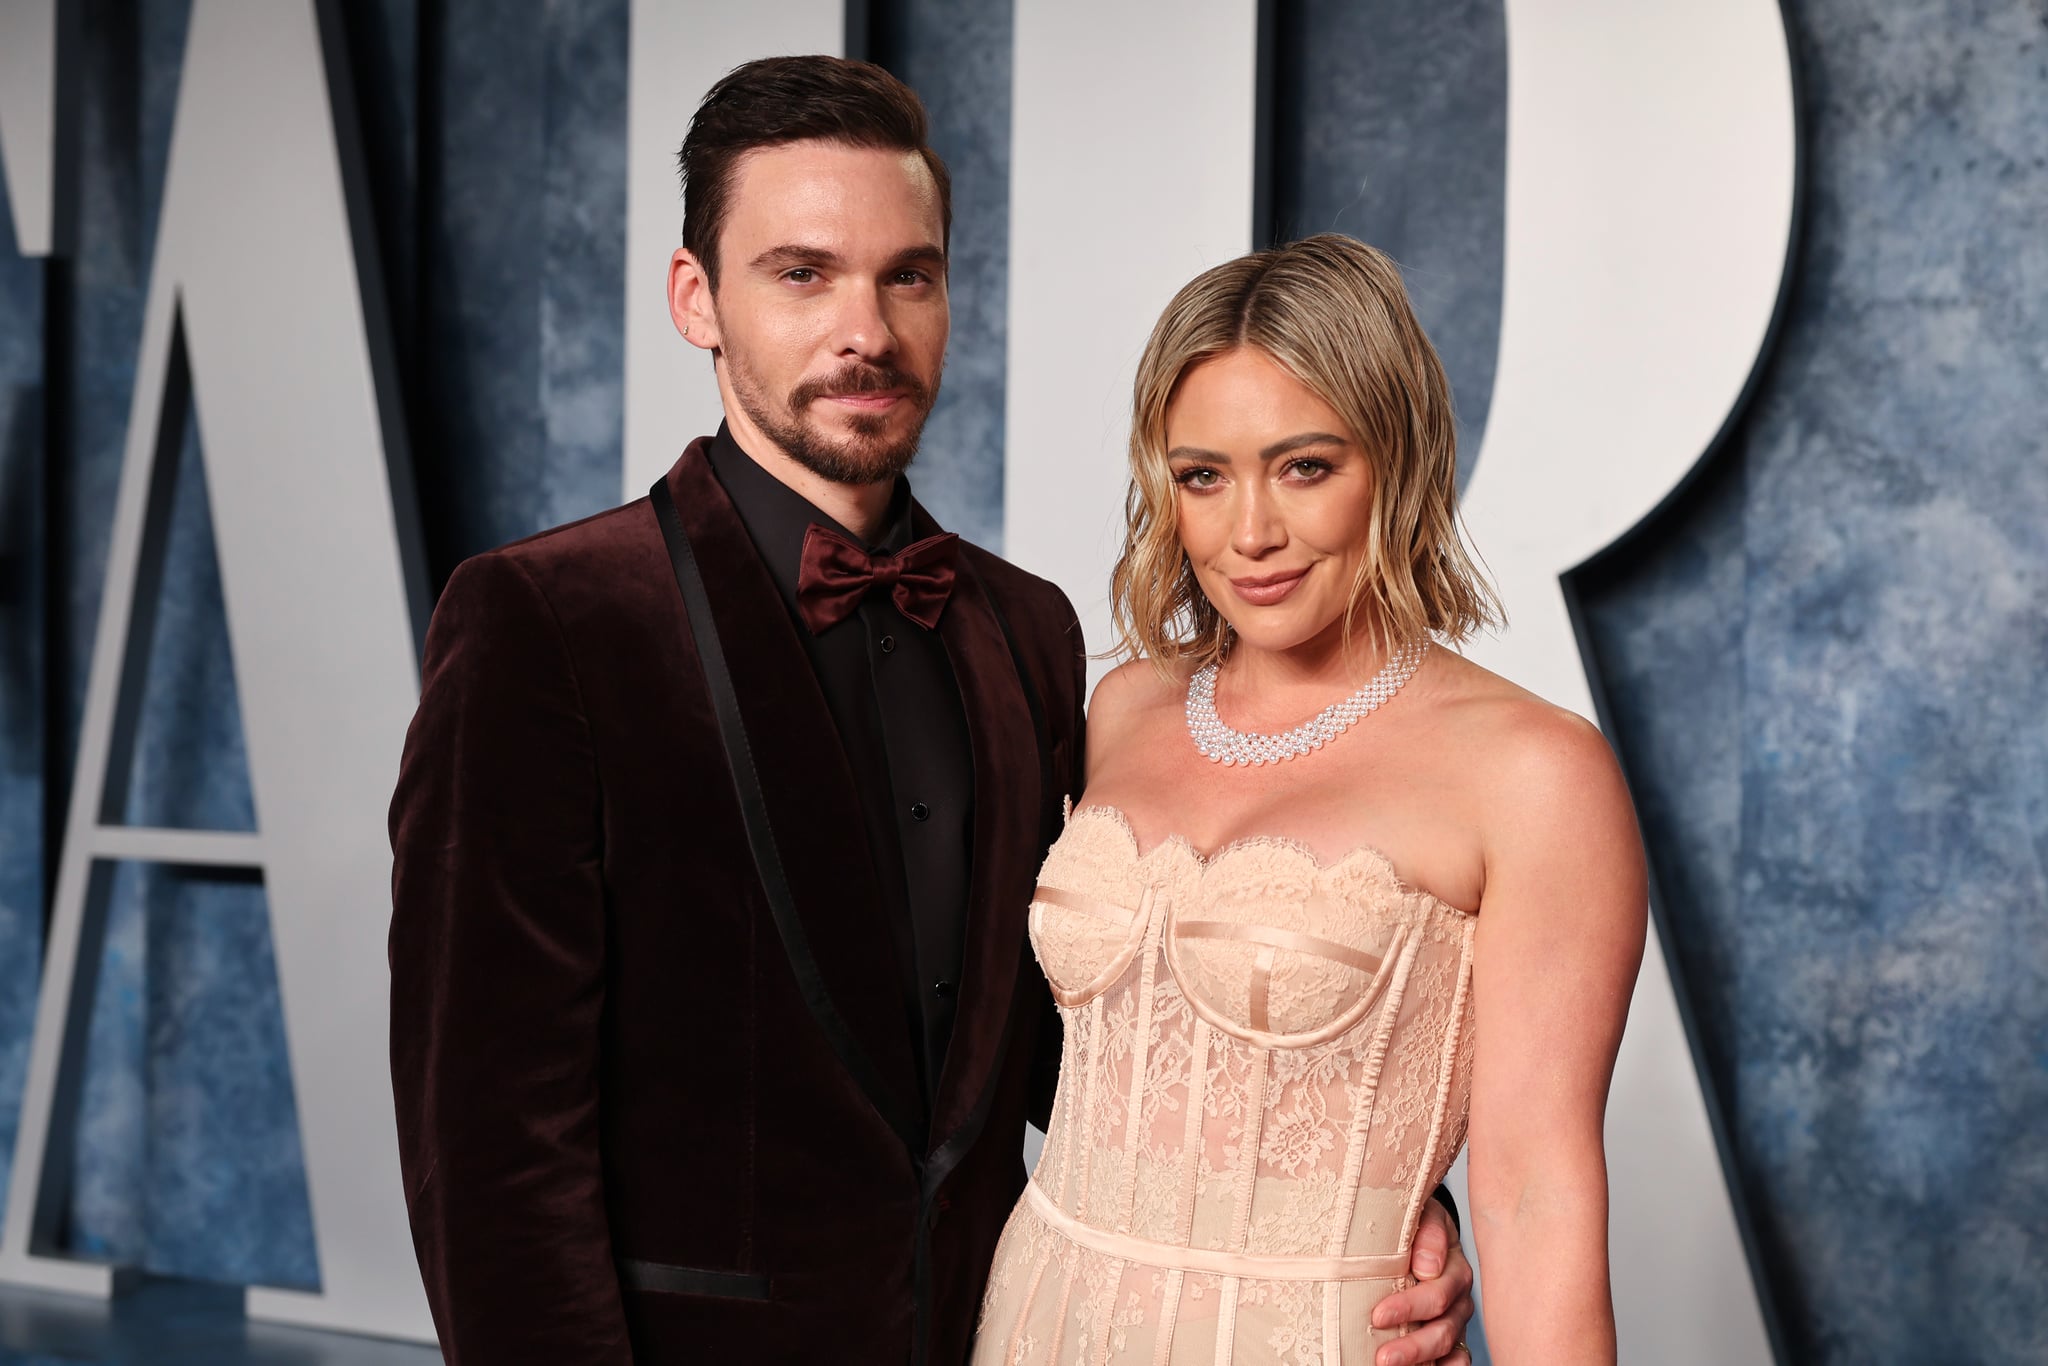 BEVERLY HILLS, CALIFORNIA - MARCH 12: Matthew Koma and Hilary Duff attend the 2023 Vanity Fair Oscar Party Hosted By Radhika Jones at Wallis Annenberg Centre for the Performing Arts on March 12, 2023 in Beverly Hills, California. (Photo by Cindy Ord/VF23/Getty Images for Vanity Fair)